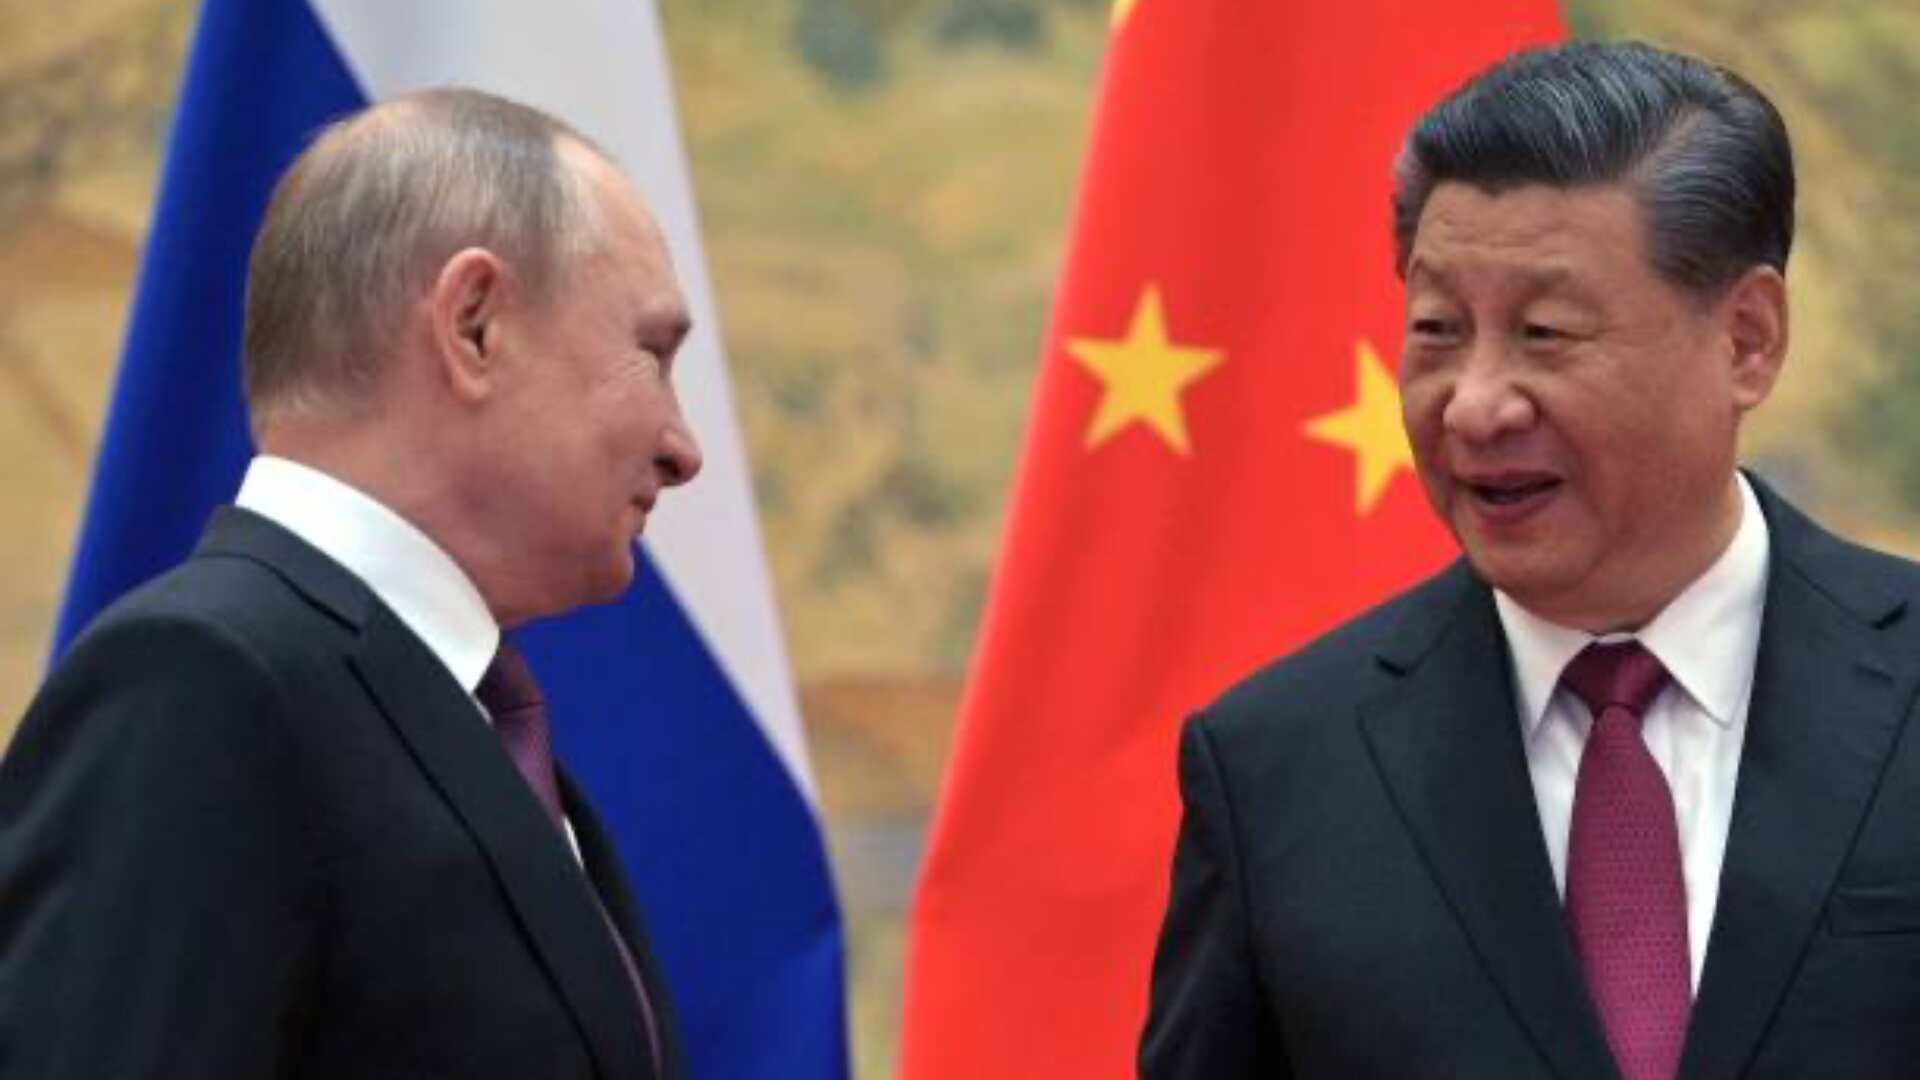 Putin Arrives in China for State Visit to Strengthen Bilateral Ties